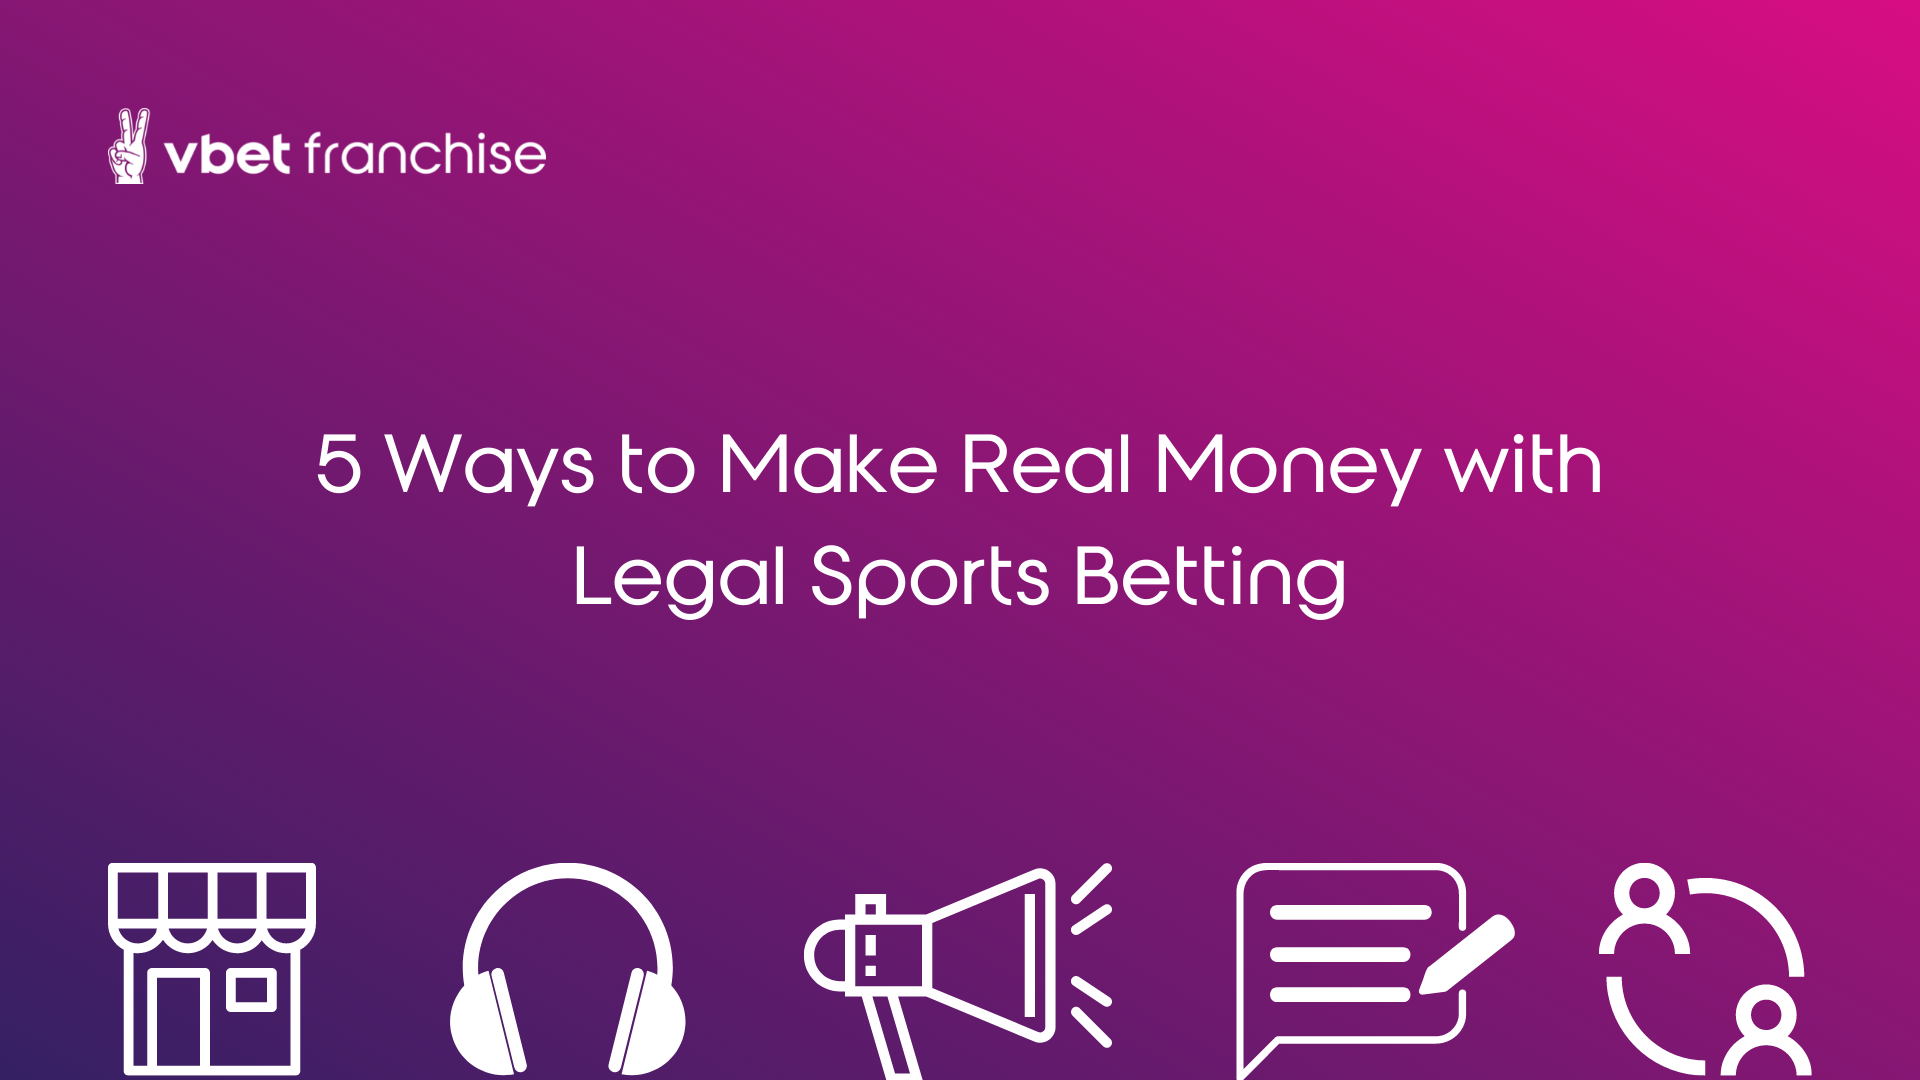 5 Ways to Make Real Money with Legal Sports Betting